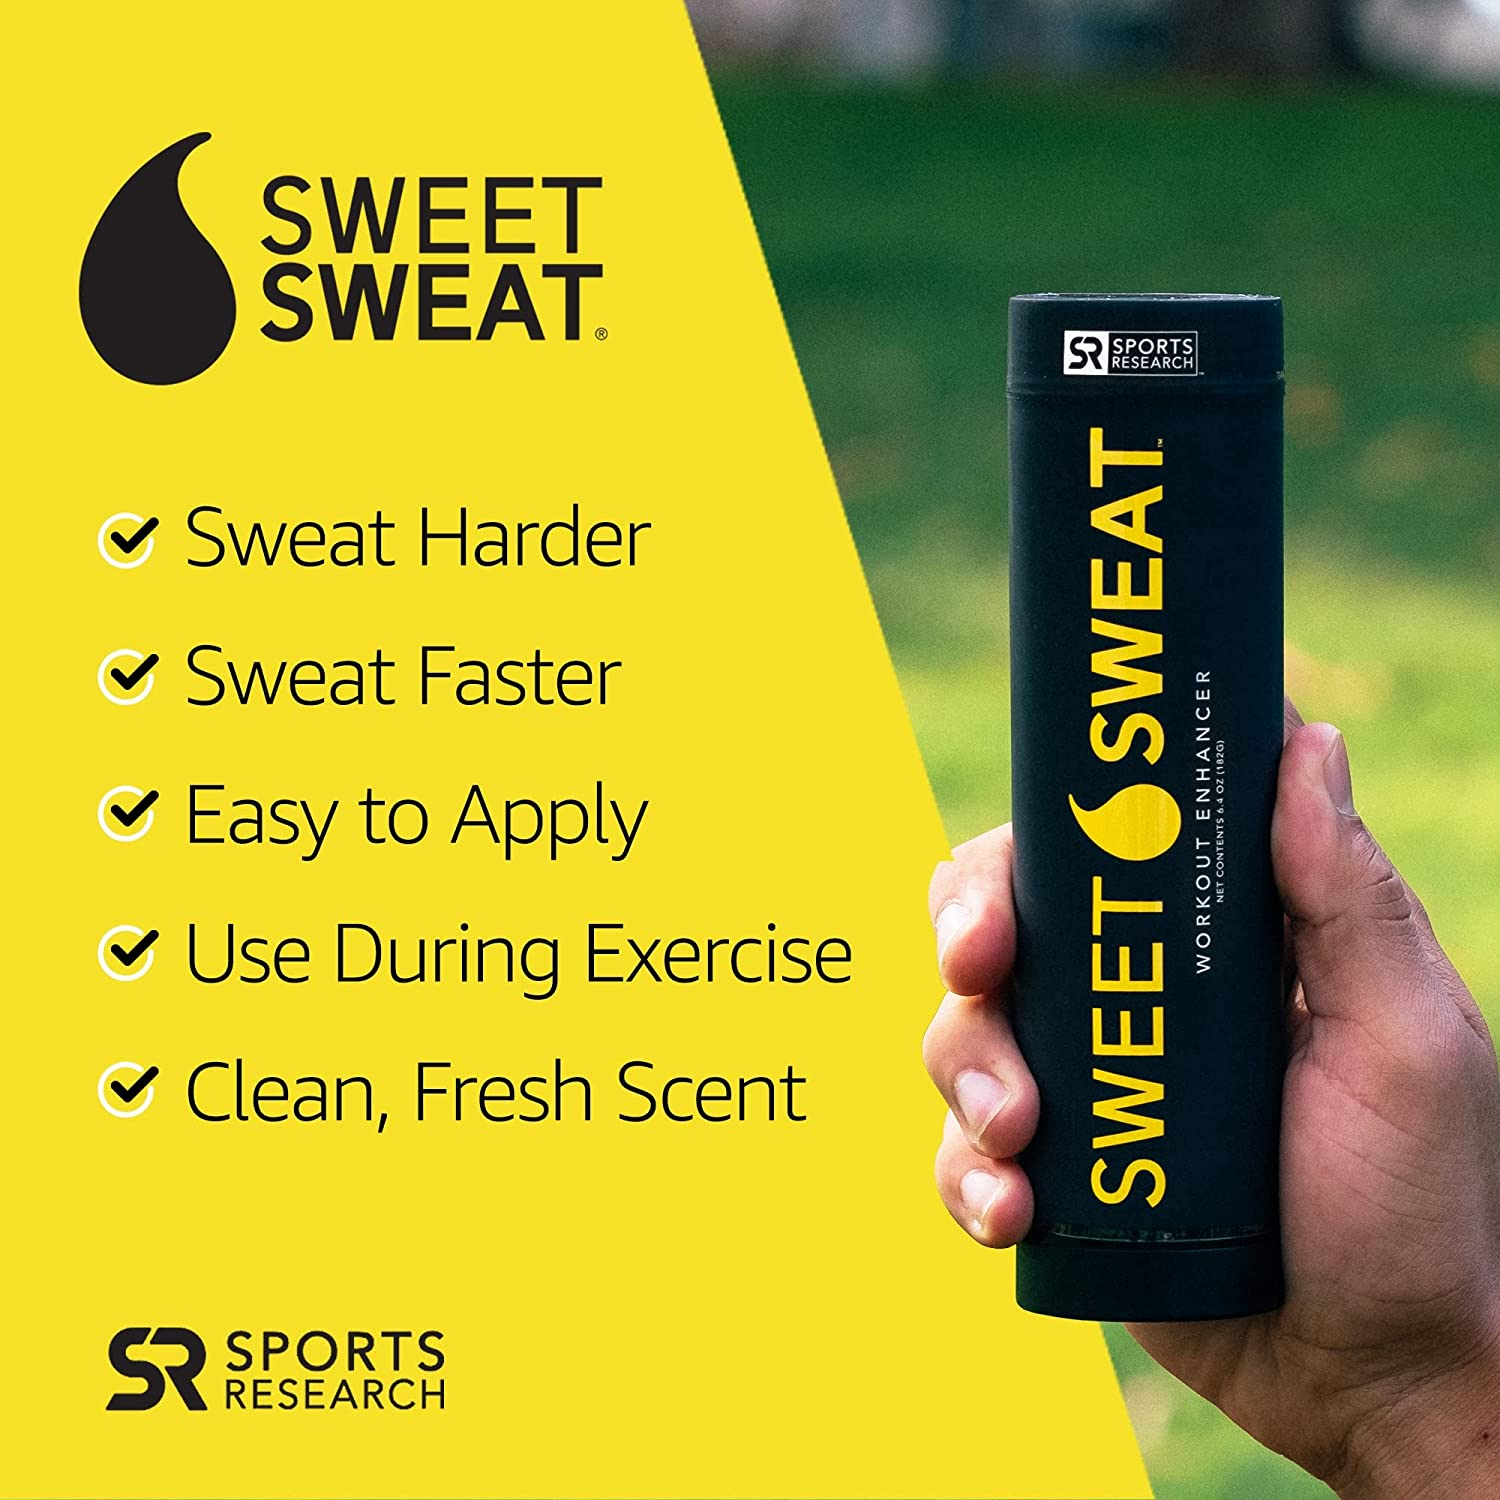 Sweet Sweat Gel Stick Get More from Your Workout: Workout Enhancer Makes You Sweat Faster & Harder - Try W/Waist Trimmer - Men’S & Women’S Toning Sweat Cream - 6.4Oz